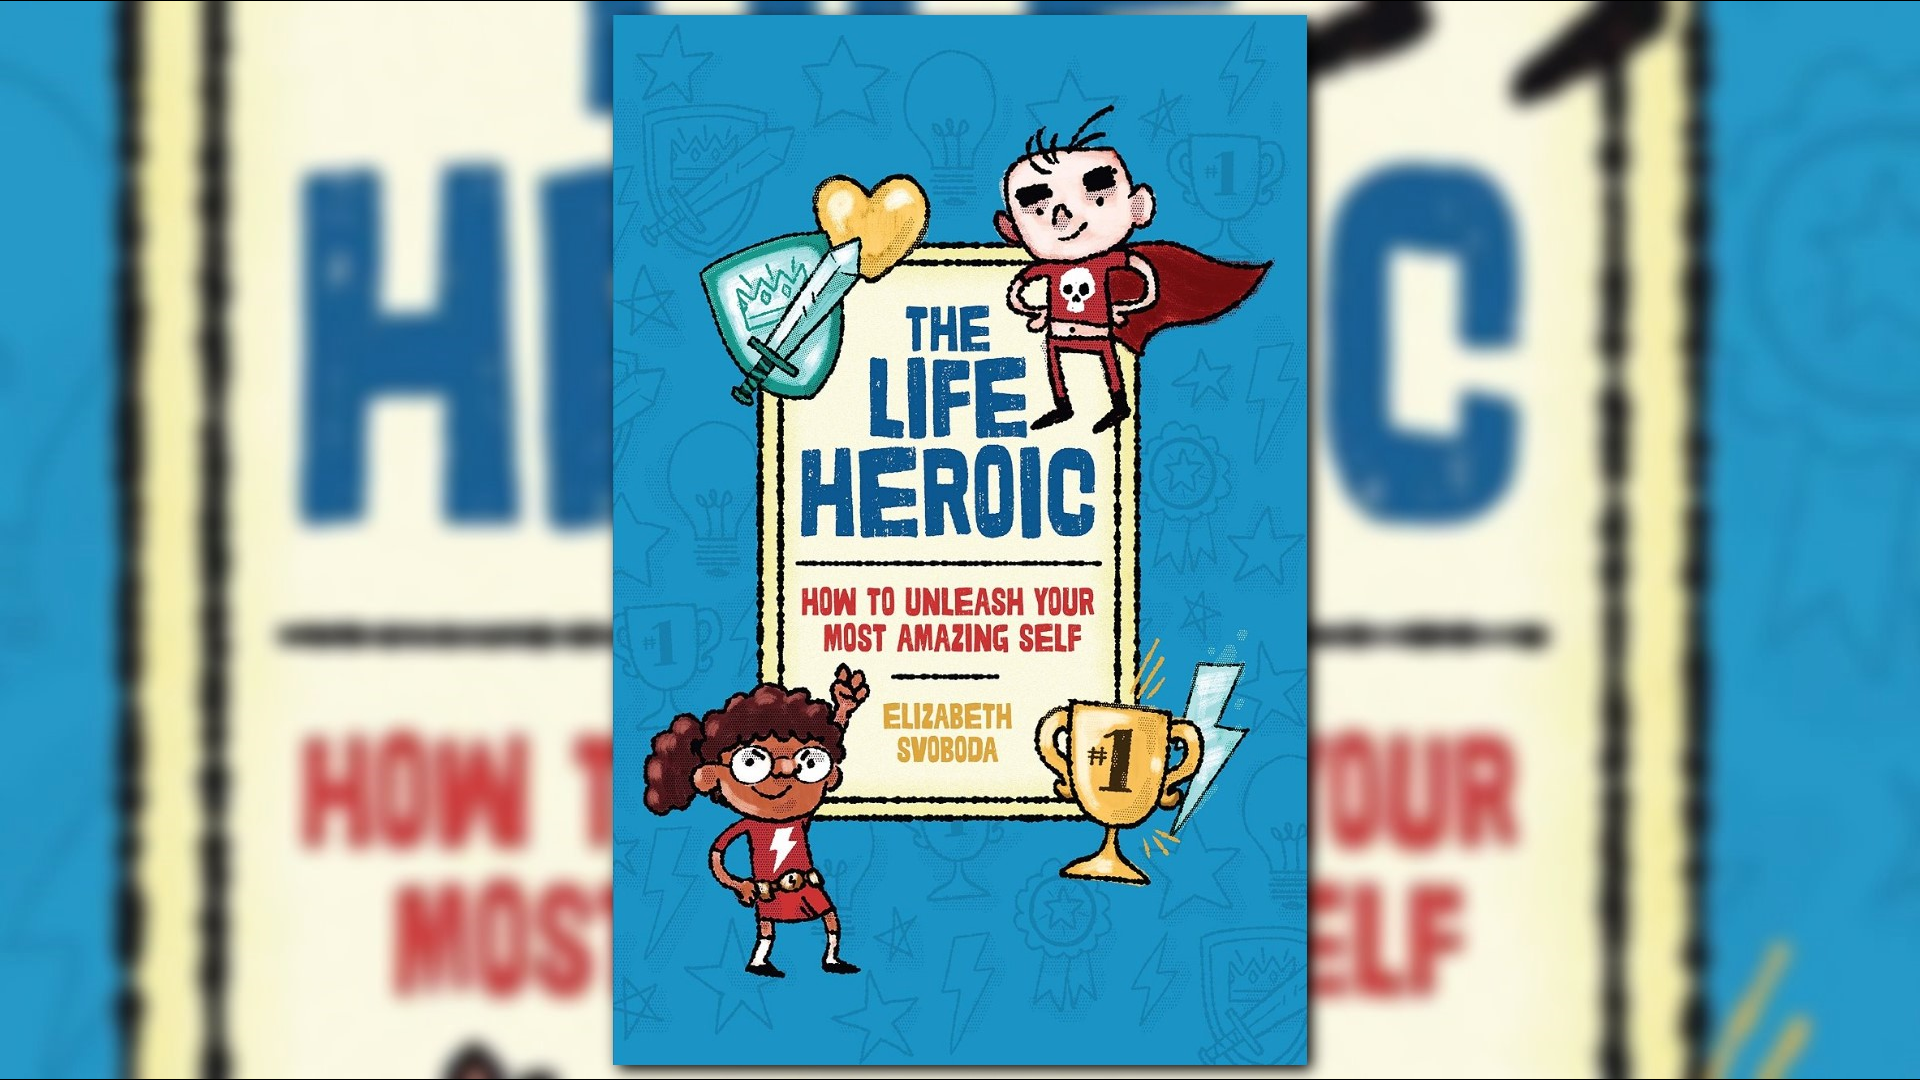 The author discusses how she got interested in heroism and how this book can help kids rise up against bullying.